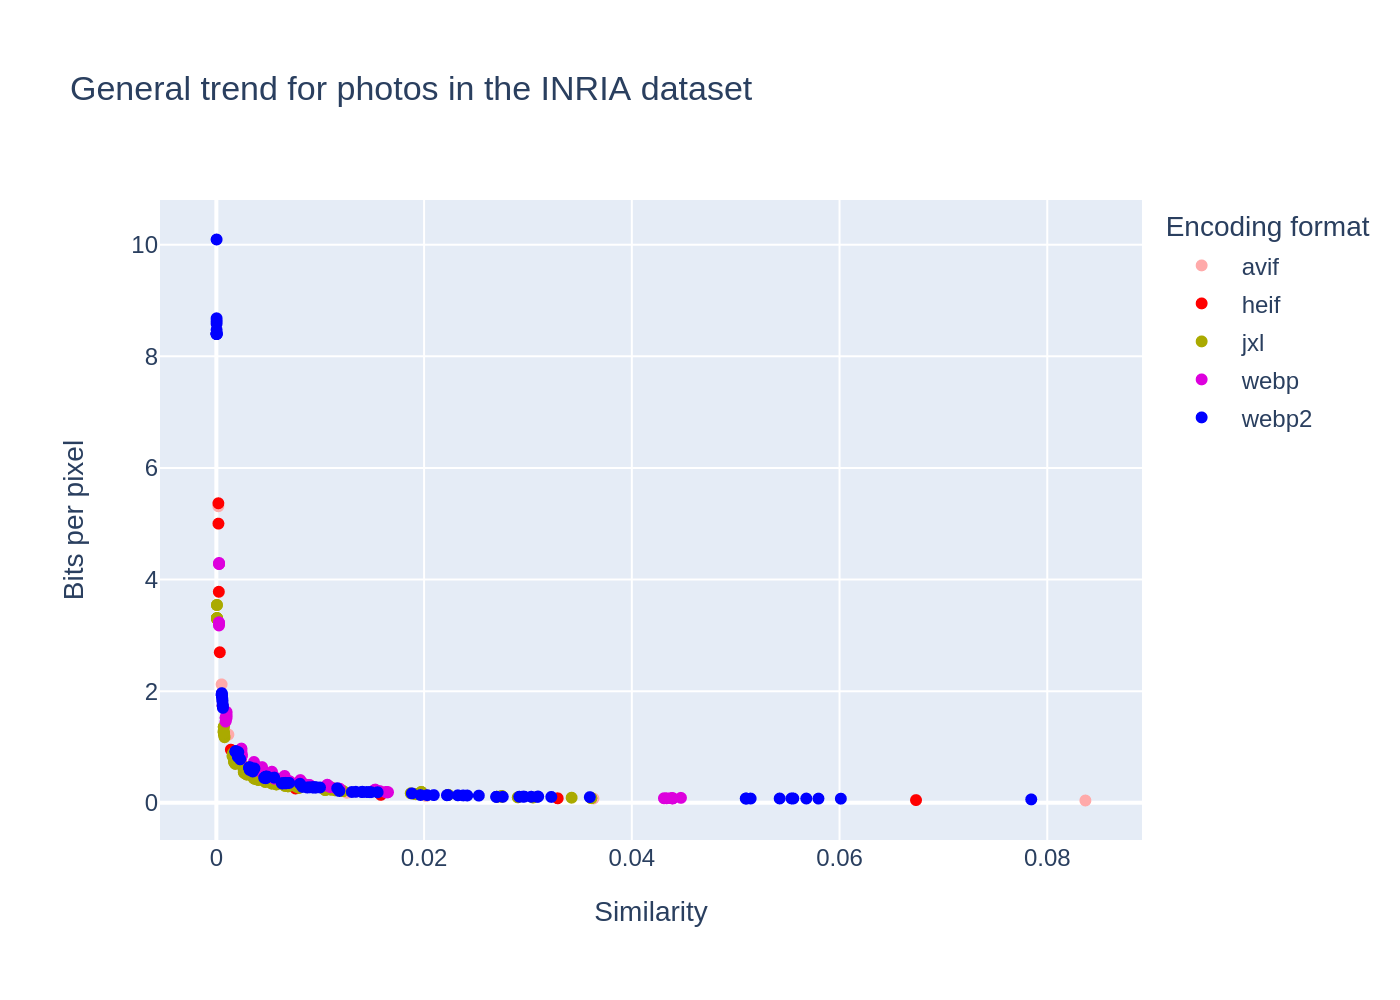 General trend for photos in the INRIA dataset, compression ratio as a function of quality for different image formats